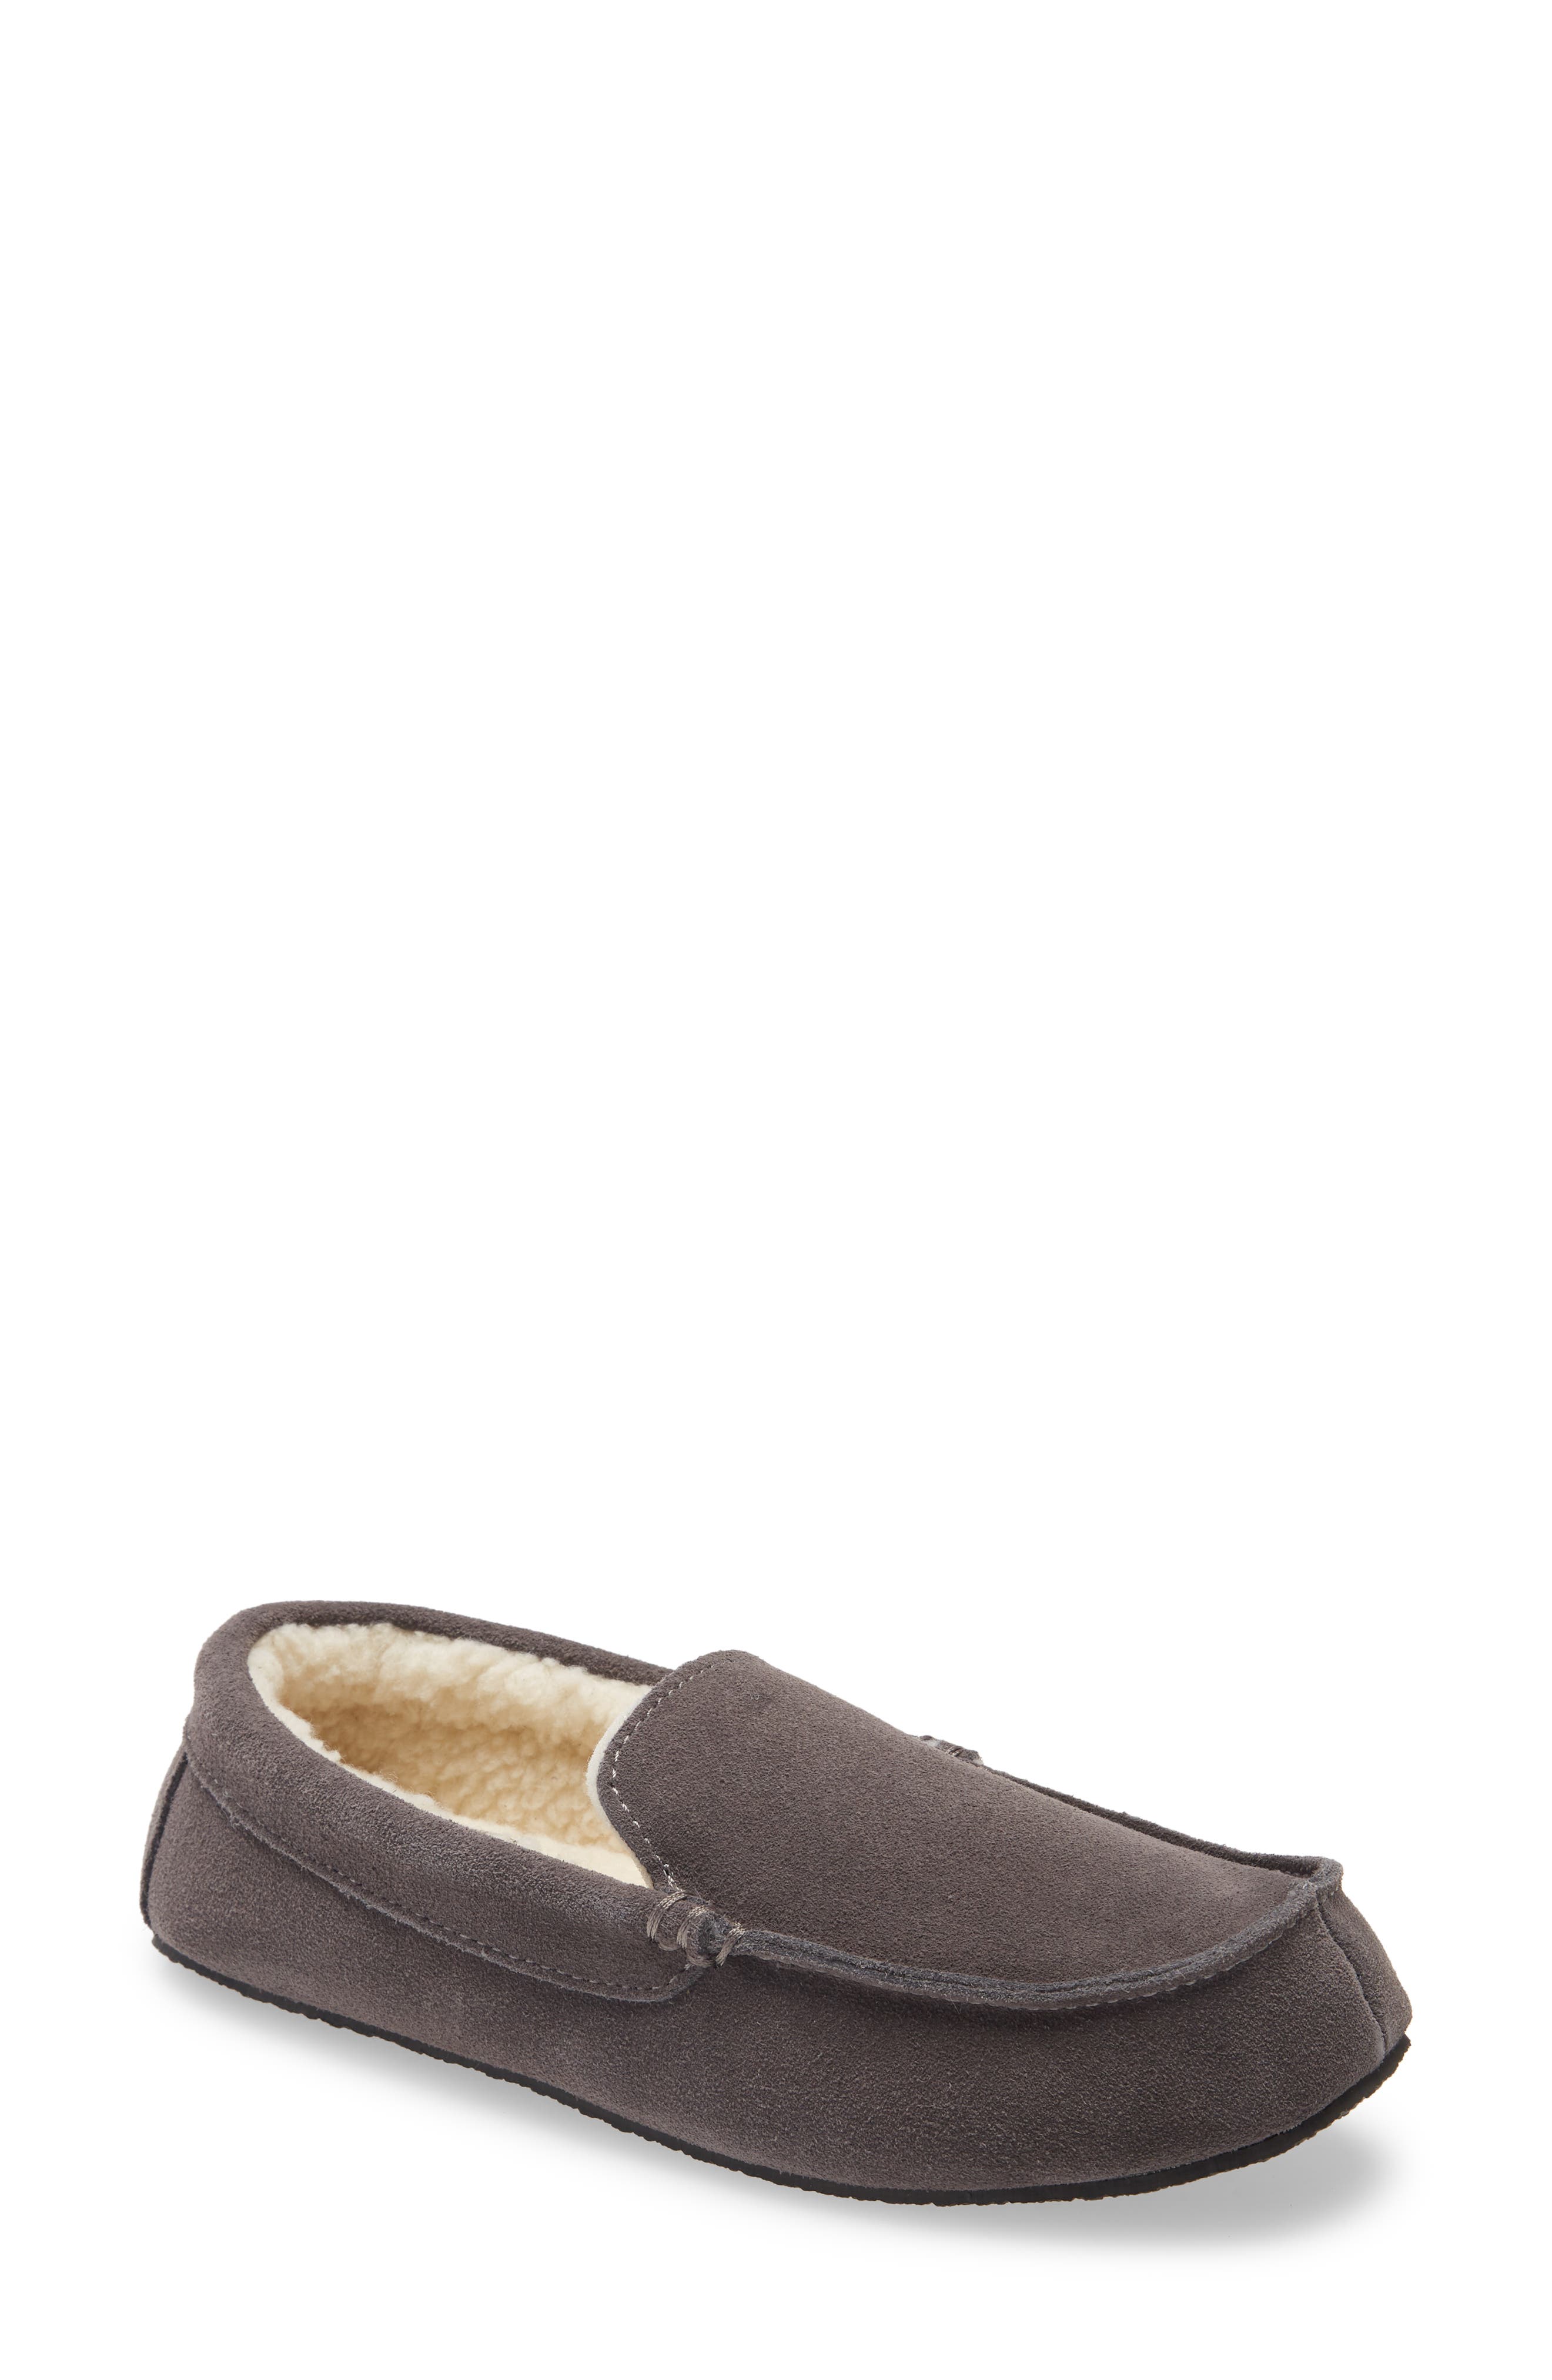 fuzzy moccasin slippers